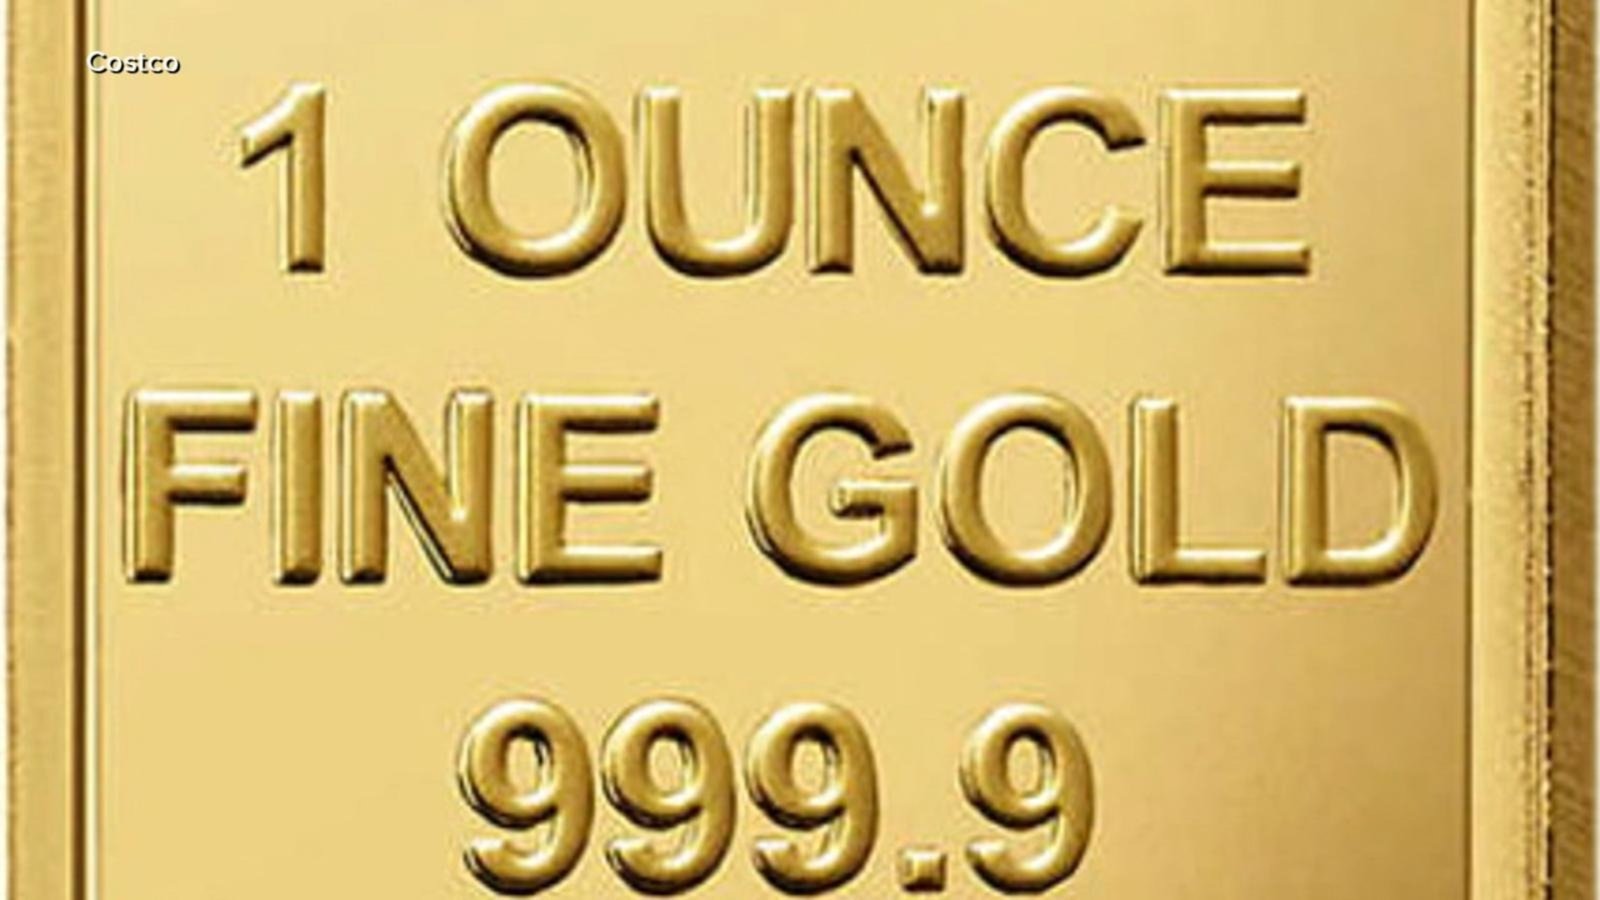 PHOTO: One-ounce Costco Gold Bar PAMP Suisse Lady Fortuna Veriscan is seen in this image.